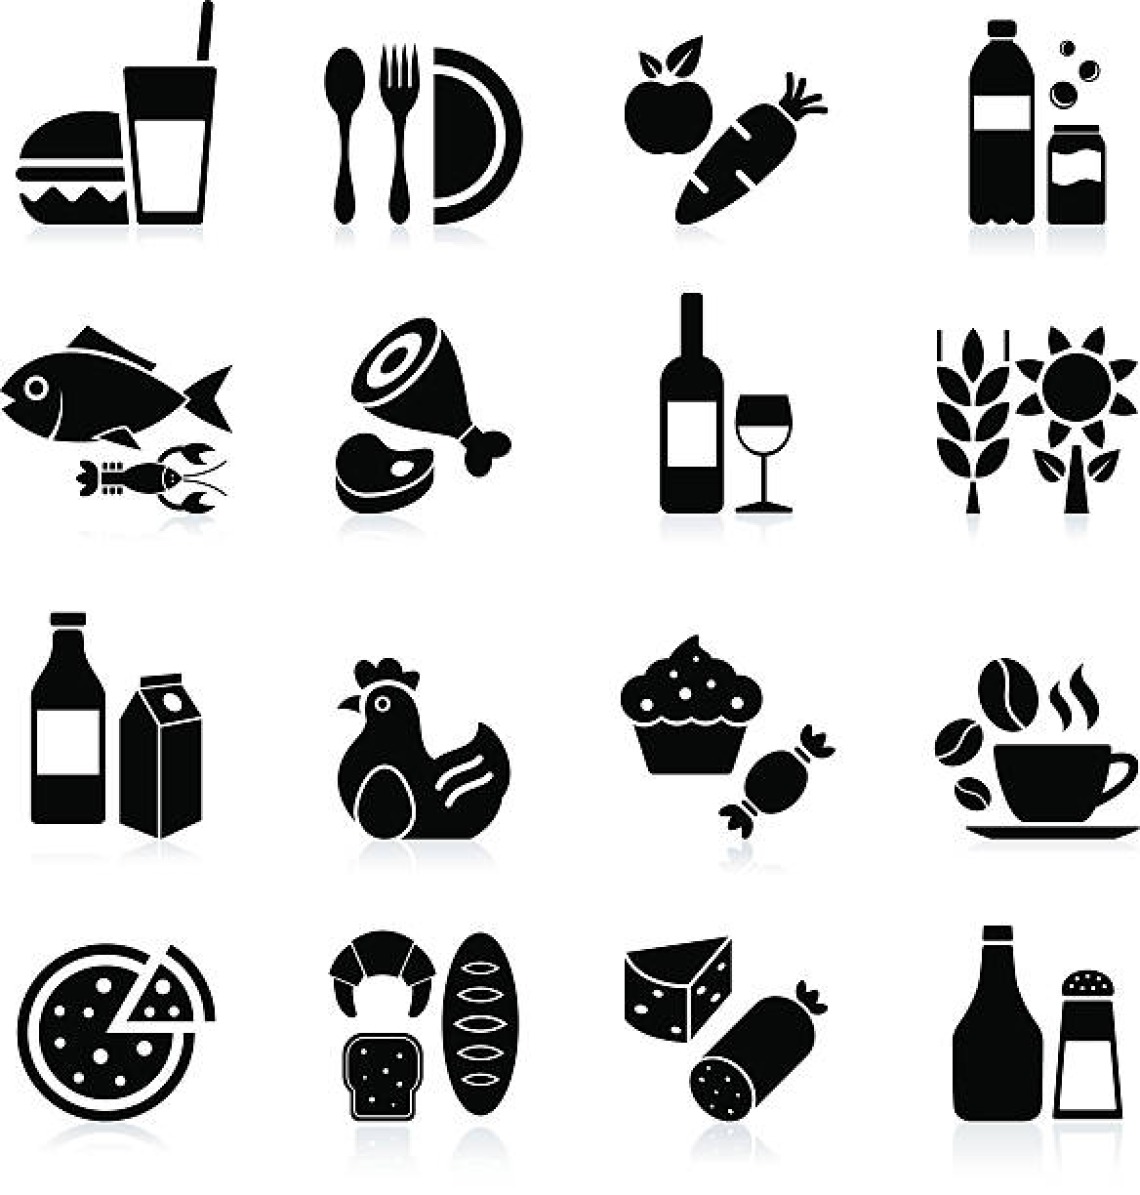 stock photo displaying foods and beverages